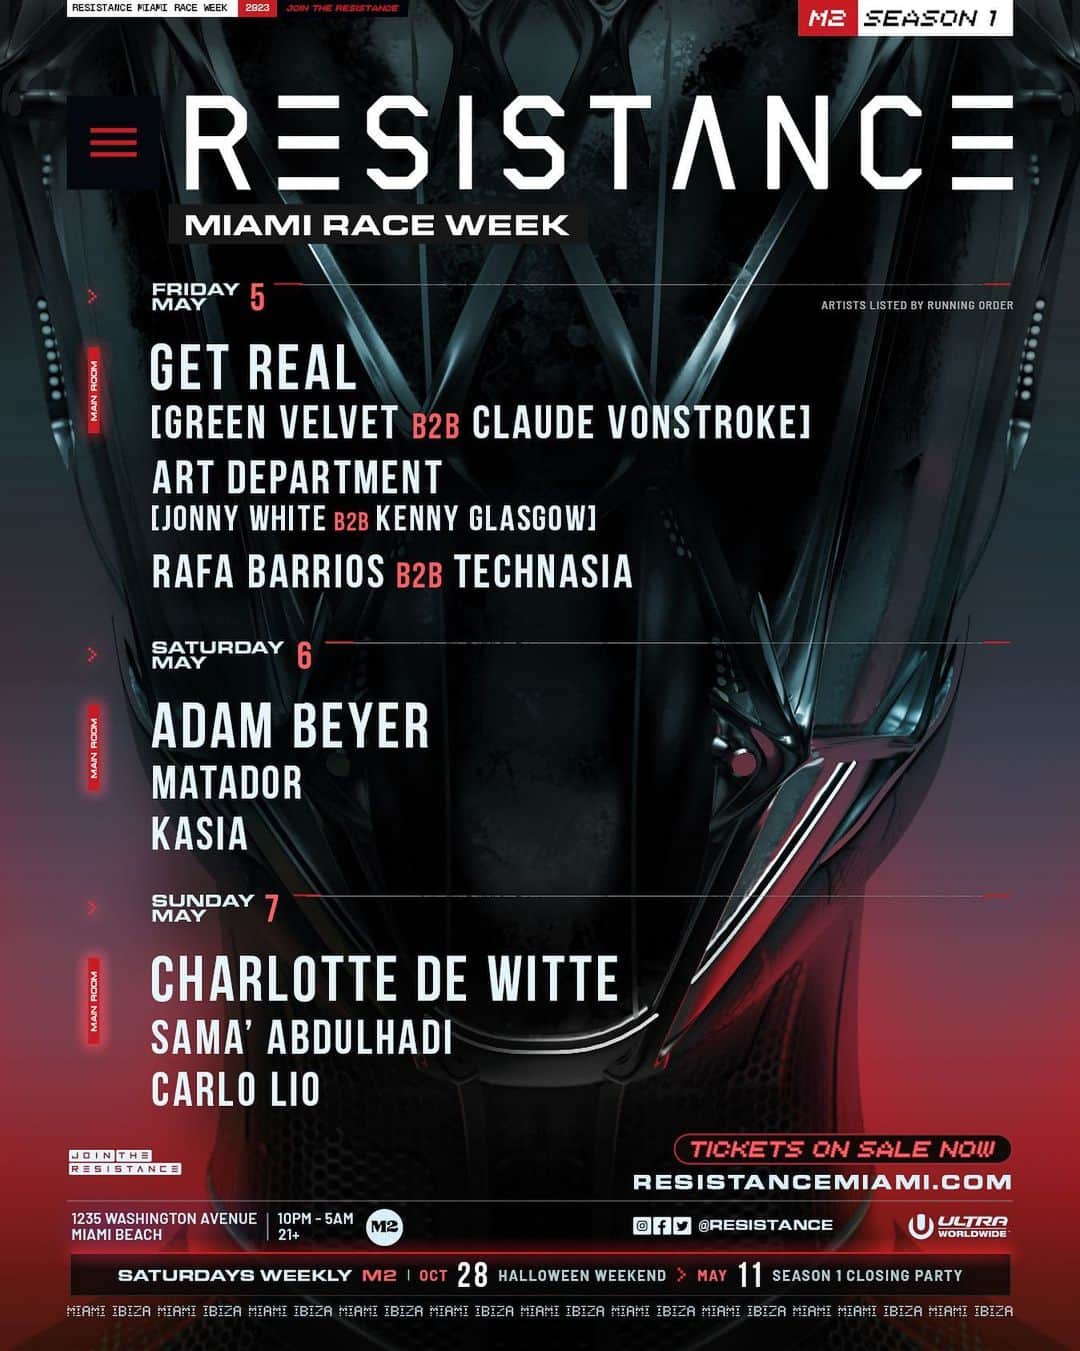 Ultra Music Festivalのインスタグラム：「🏎💨 Strap in, the full lineups for the RESISTANCE Miami Club Residency at M2 during Miami Race Week are out now! Join us from May 5-7 as we continue Season 1 of the #ResistanceResidency! #ResistanceMiami   Fri. May 5 - Get Real (@officialgreenvelvet B2B @vonstroke), @artdepartmentofficial (Jonny White B2B @kenny.glasgow.73), @rafabarriosdj B2B @technasiaofficial  Sat. May 6 - @realadambeyer, @matador_official, @kasia.music_ Sun. May 7 - @charlottedewittemusic @samaabdulhadiofficial, @carlolio  Don’t wait, limited tickets available ➡️ resistancemiami.com/tickets.   Table Reservations ➡️ resistancemiami.com/tables」